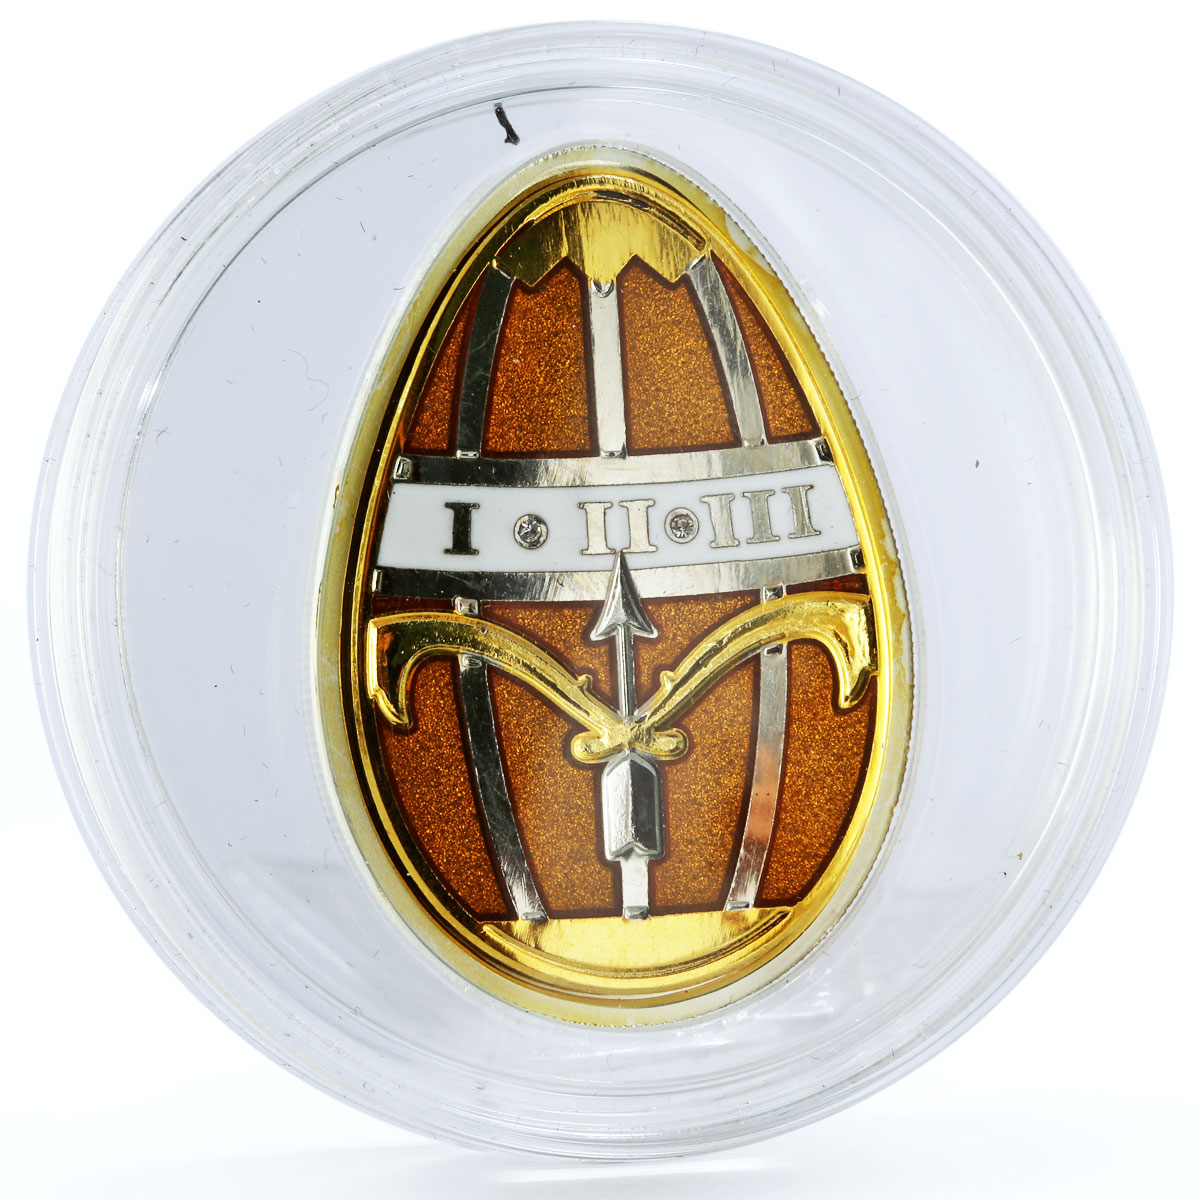 Cook Islands 5 dollars Imperial Faberge in Cloisonne Gold Egg silver coin 2013